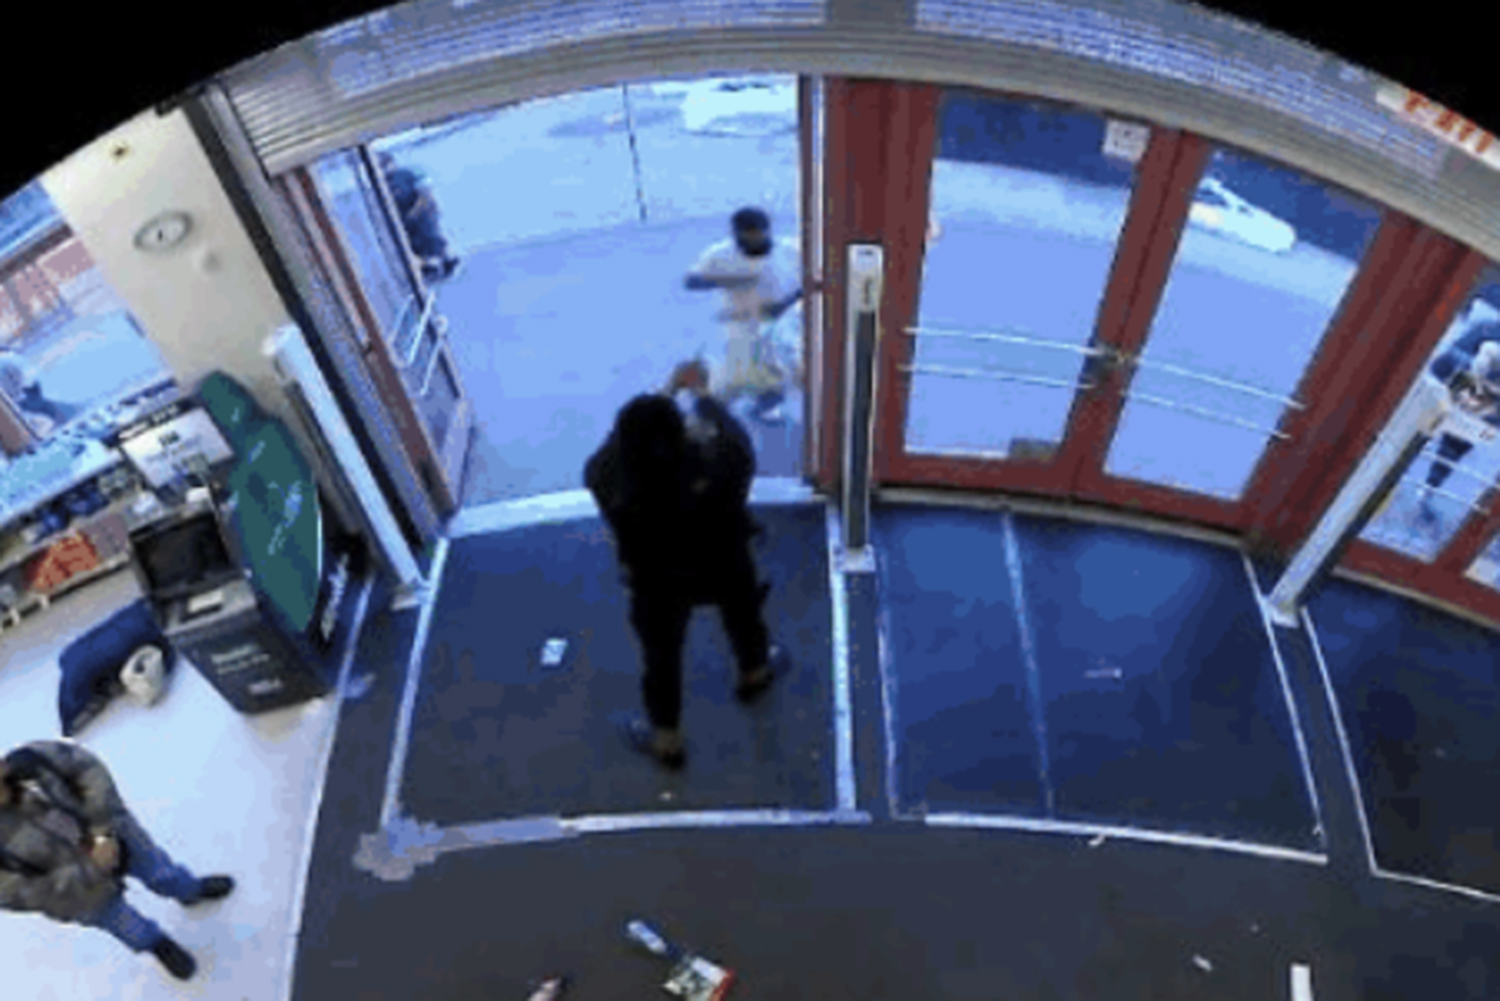 Watch: DA releases videos of fatal shooting of Banko Brown at Walgreens